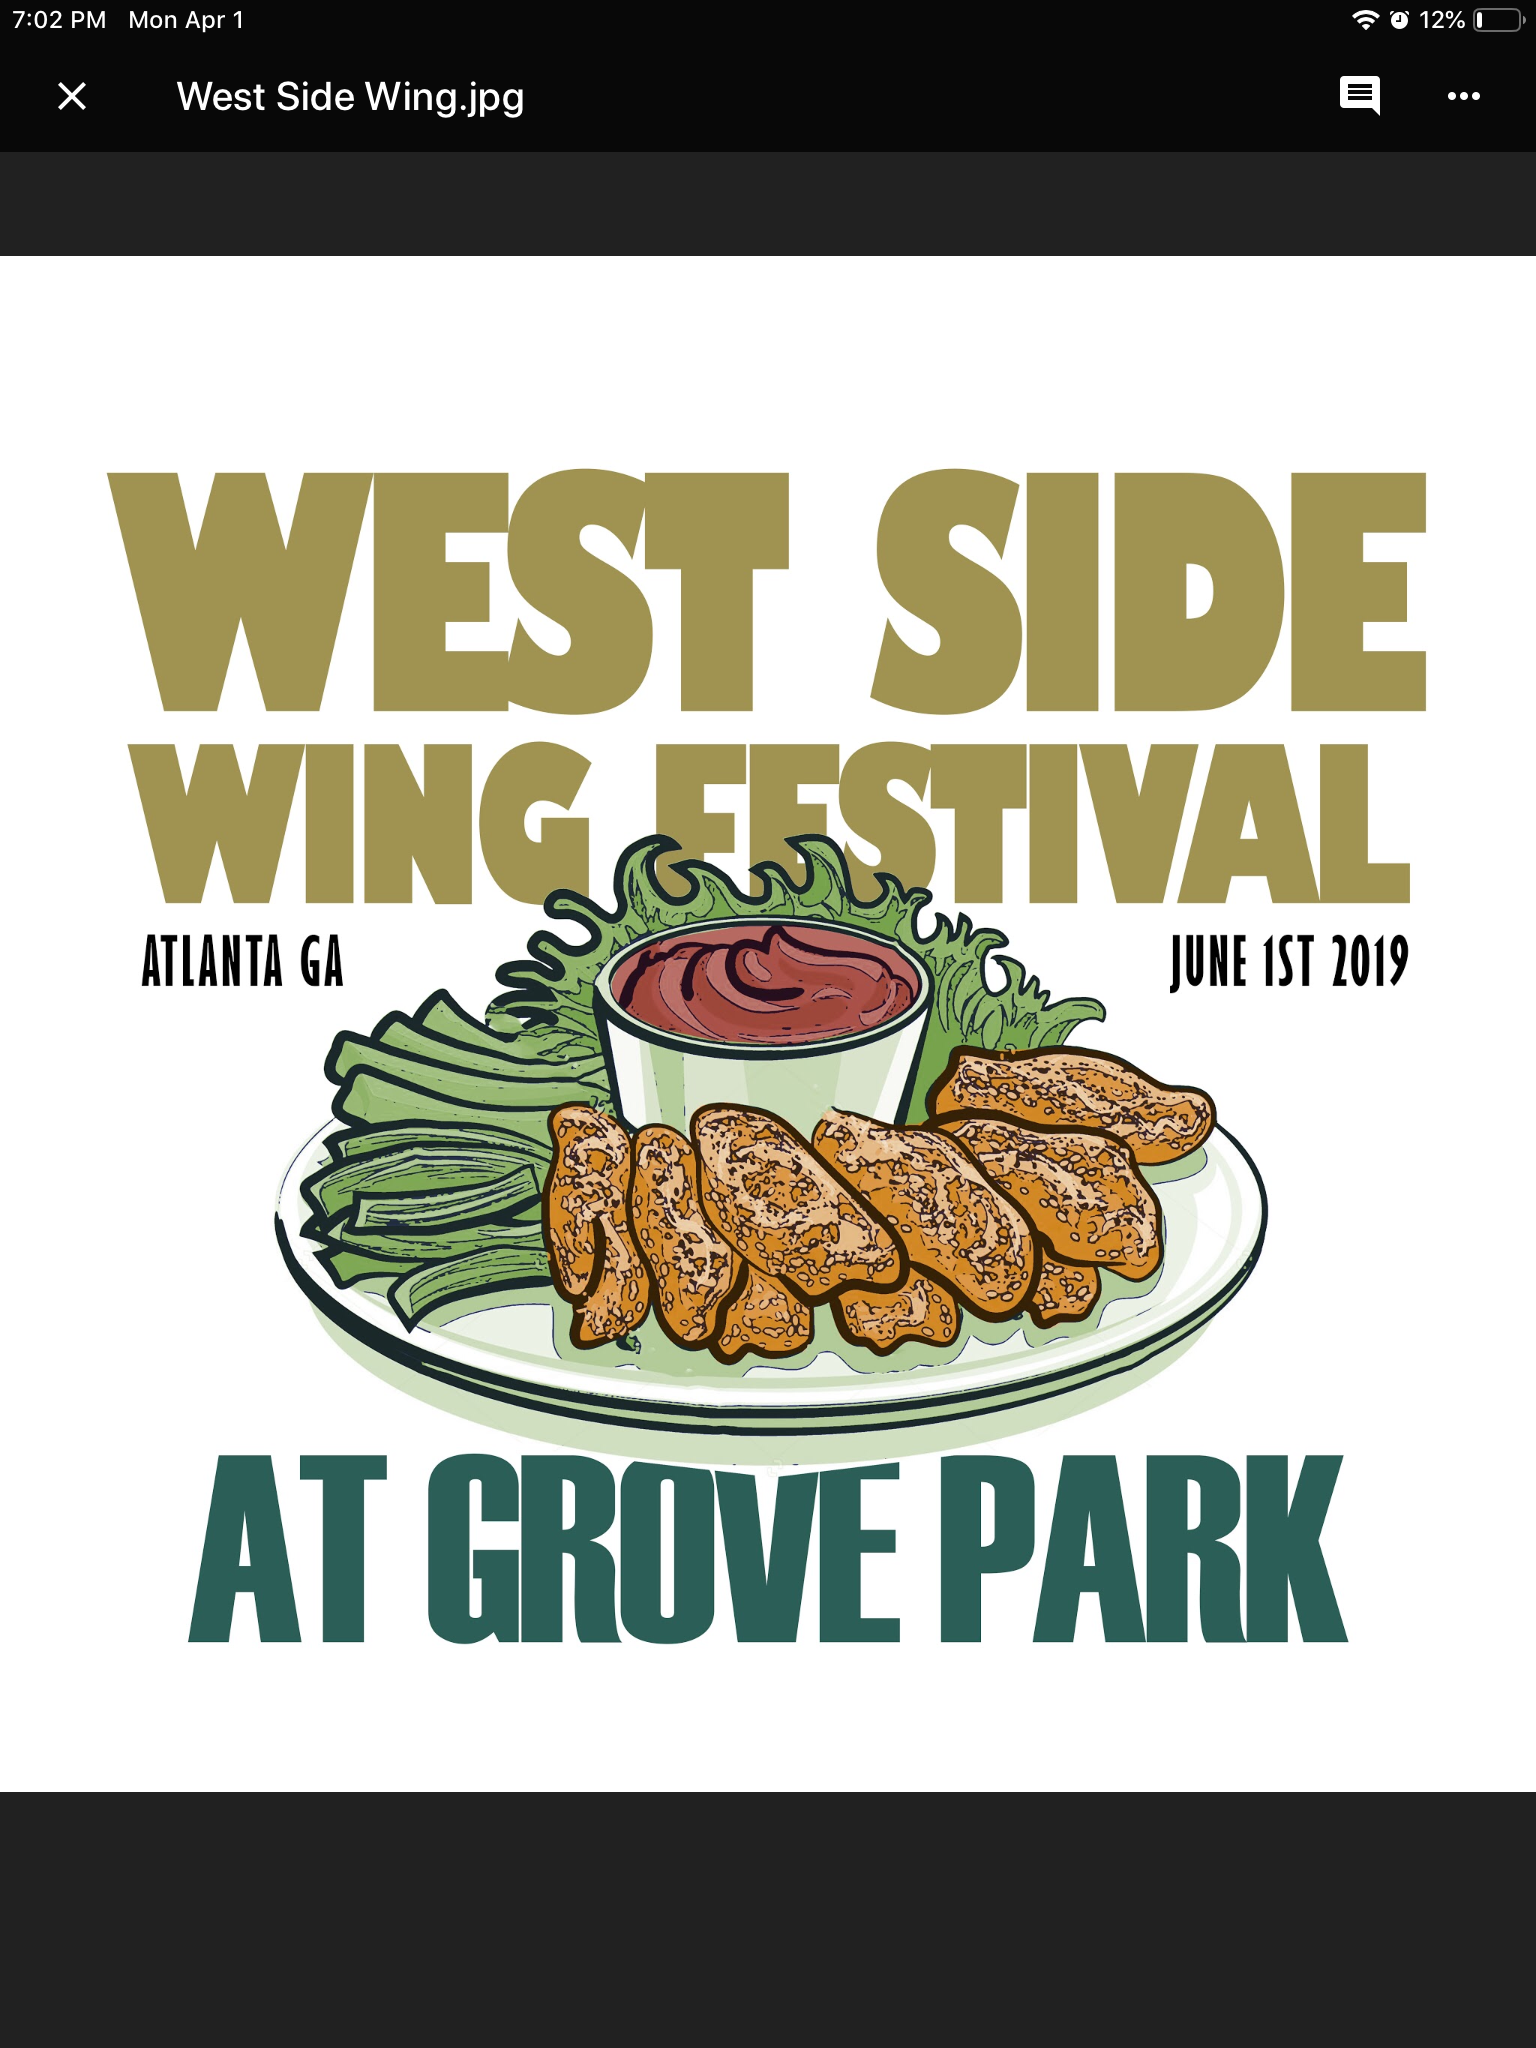 Westside Wing Festival at Grove Park Time, Date, Info